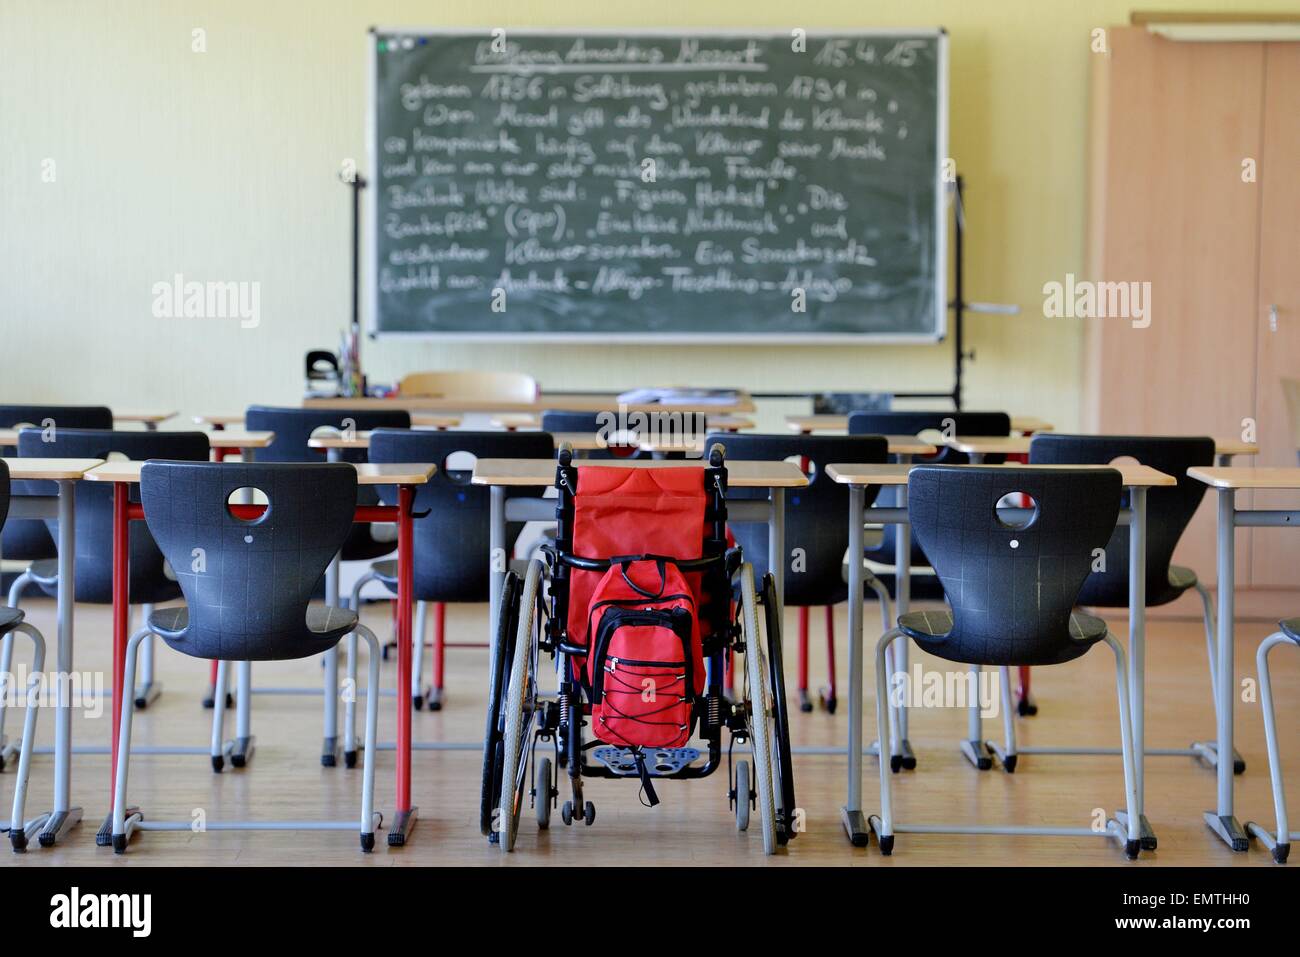 A wheelchair standing between other chairs in a school classroom./picture alliance Stock Photo